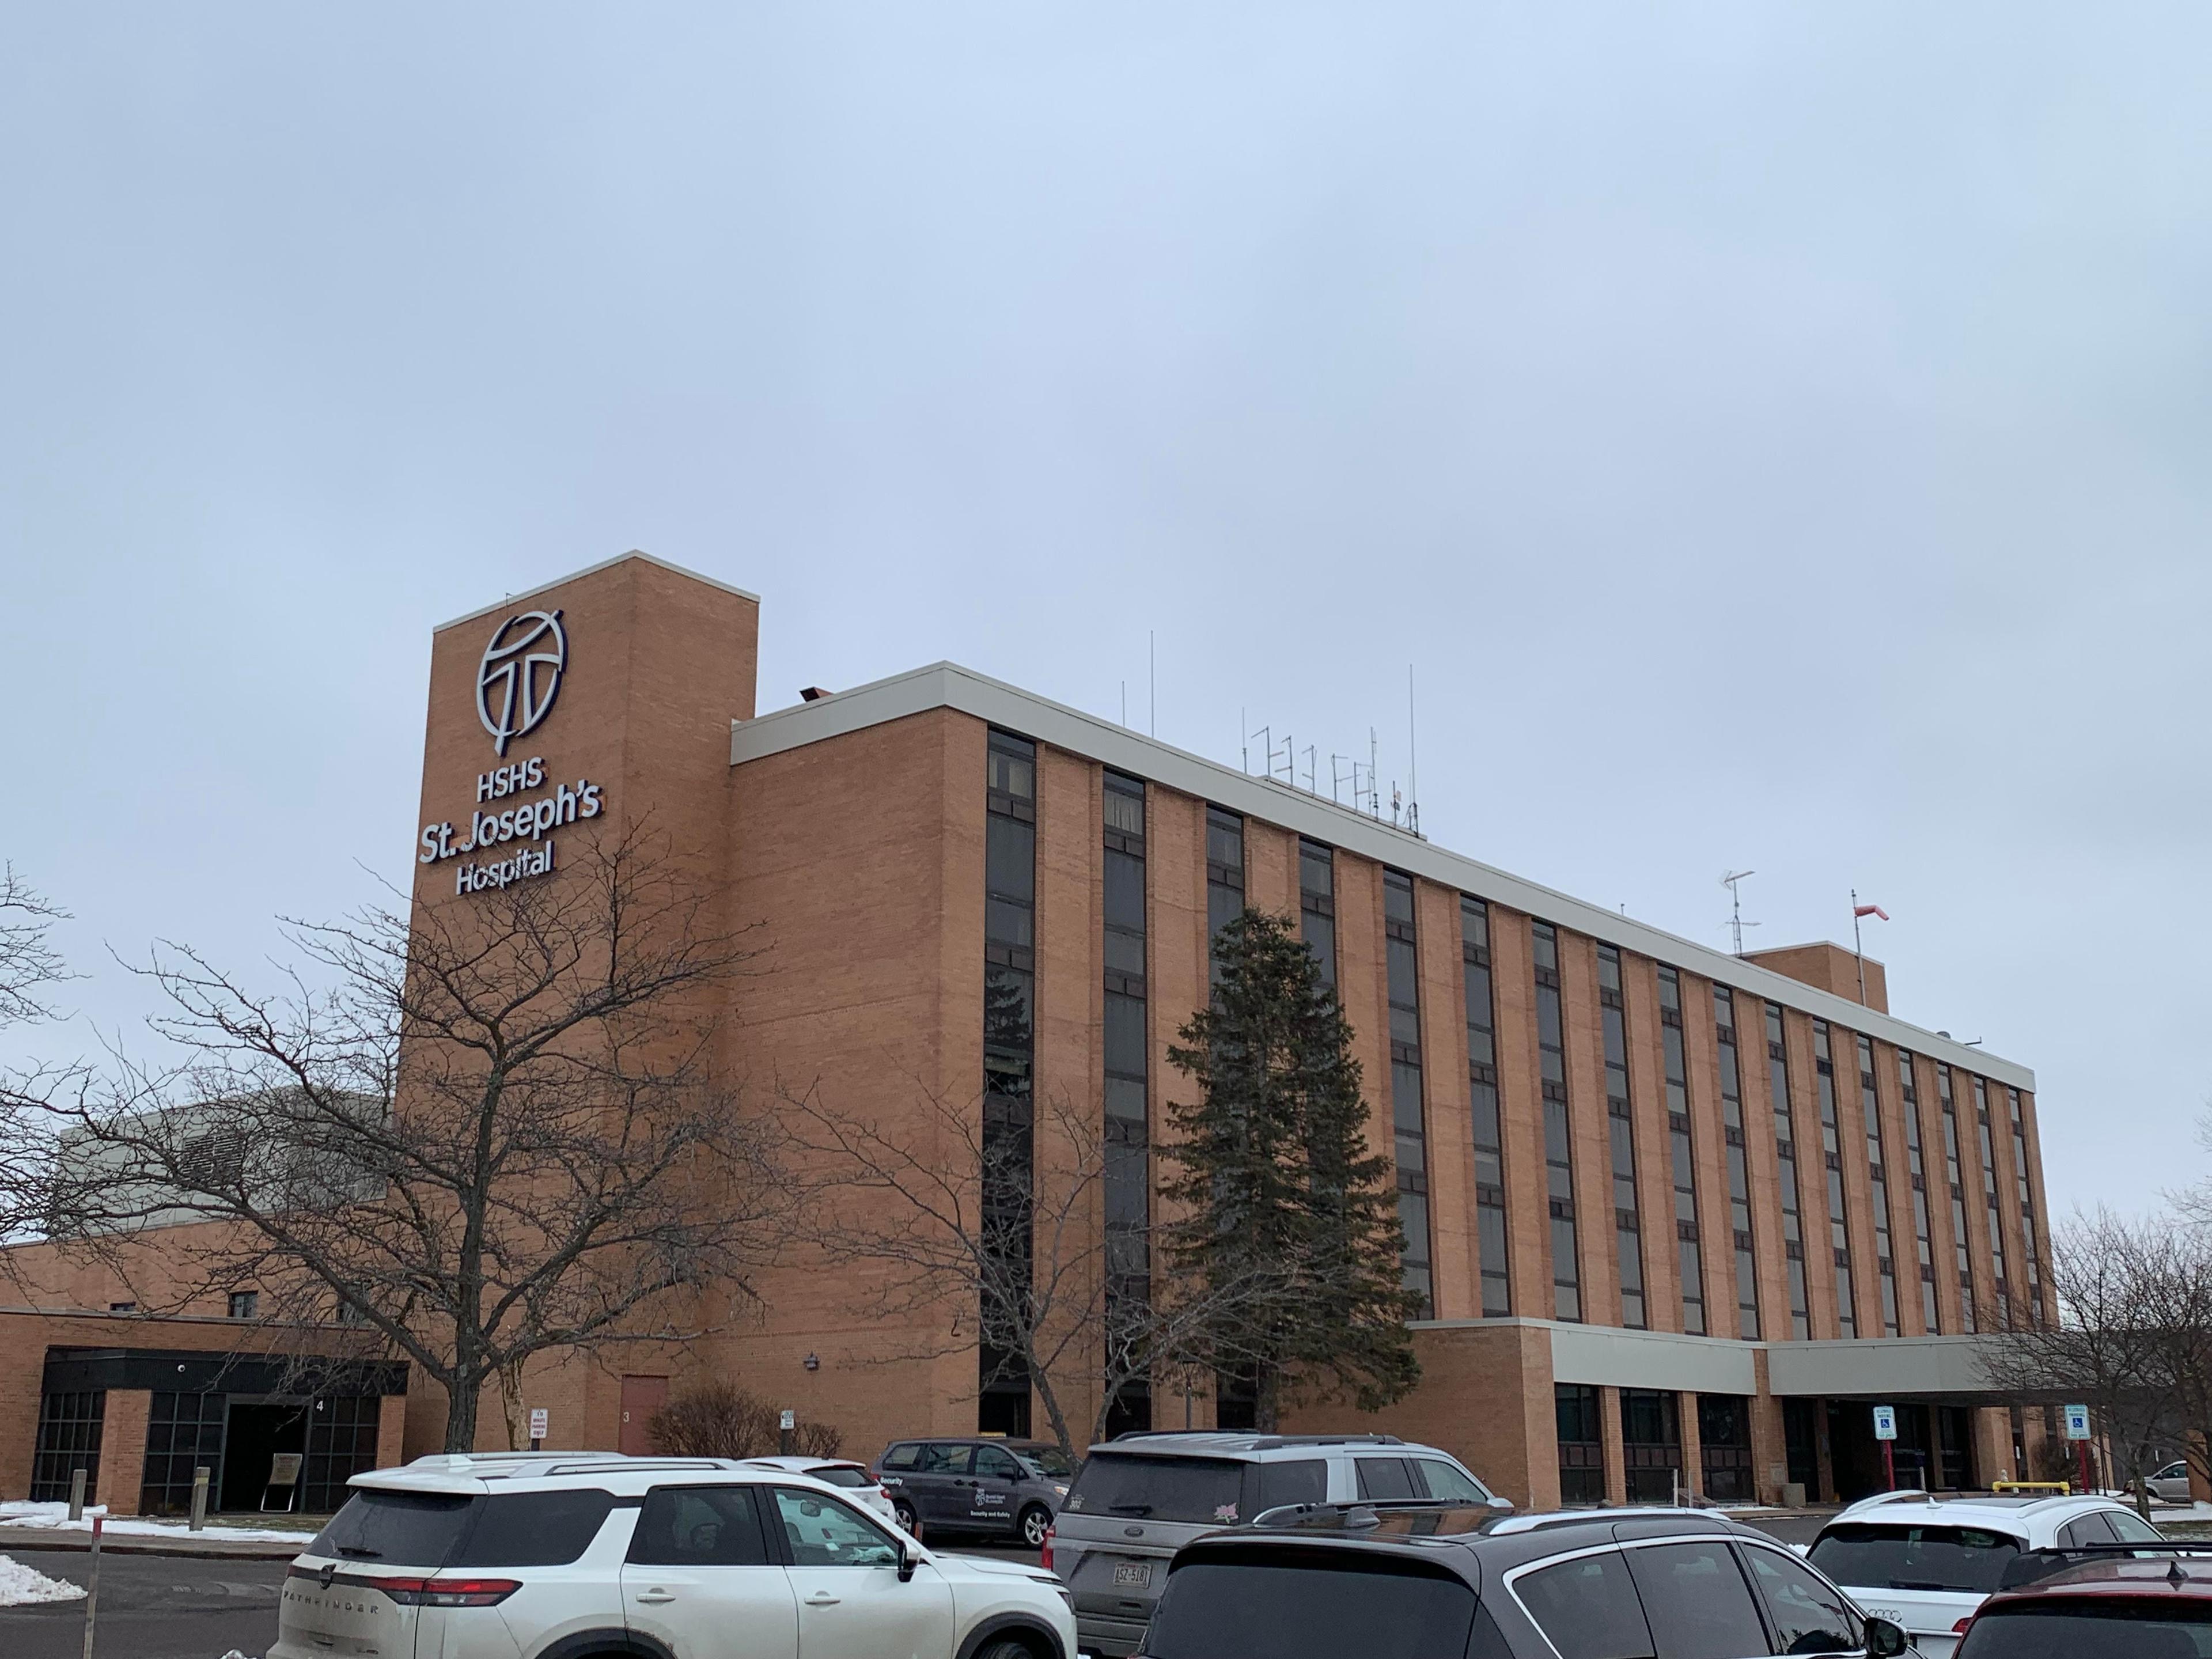 Sacred Heart Hospital in Eau Claire to Close Earlier than Expected